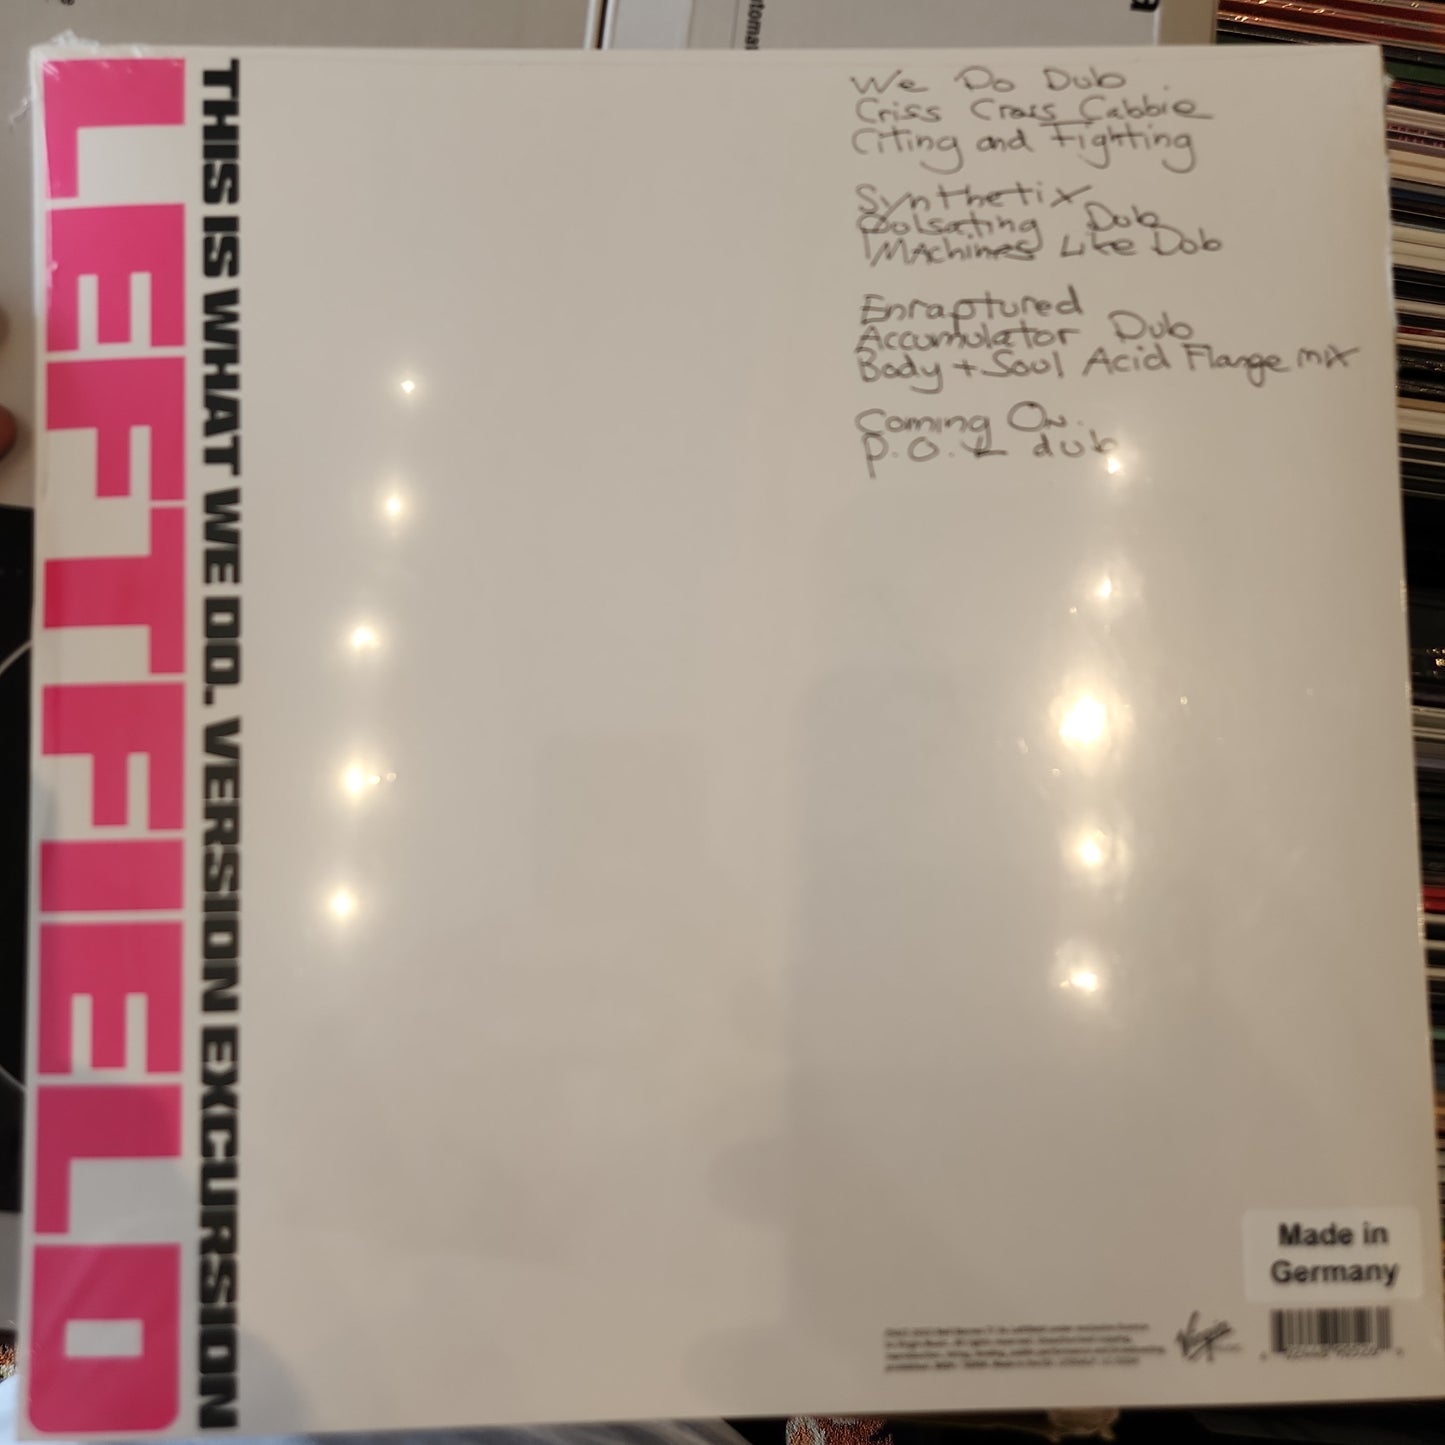 Leftfield - This is what we do - RSD Vinyl LP